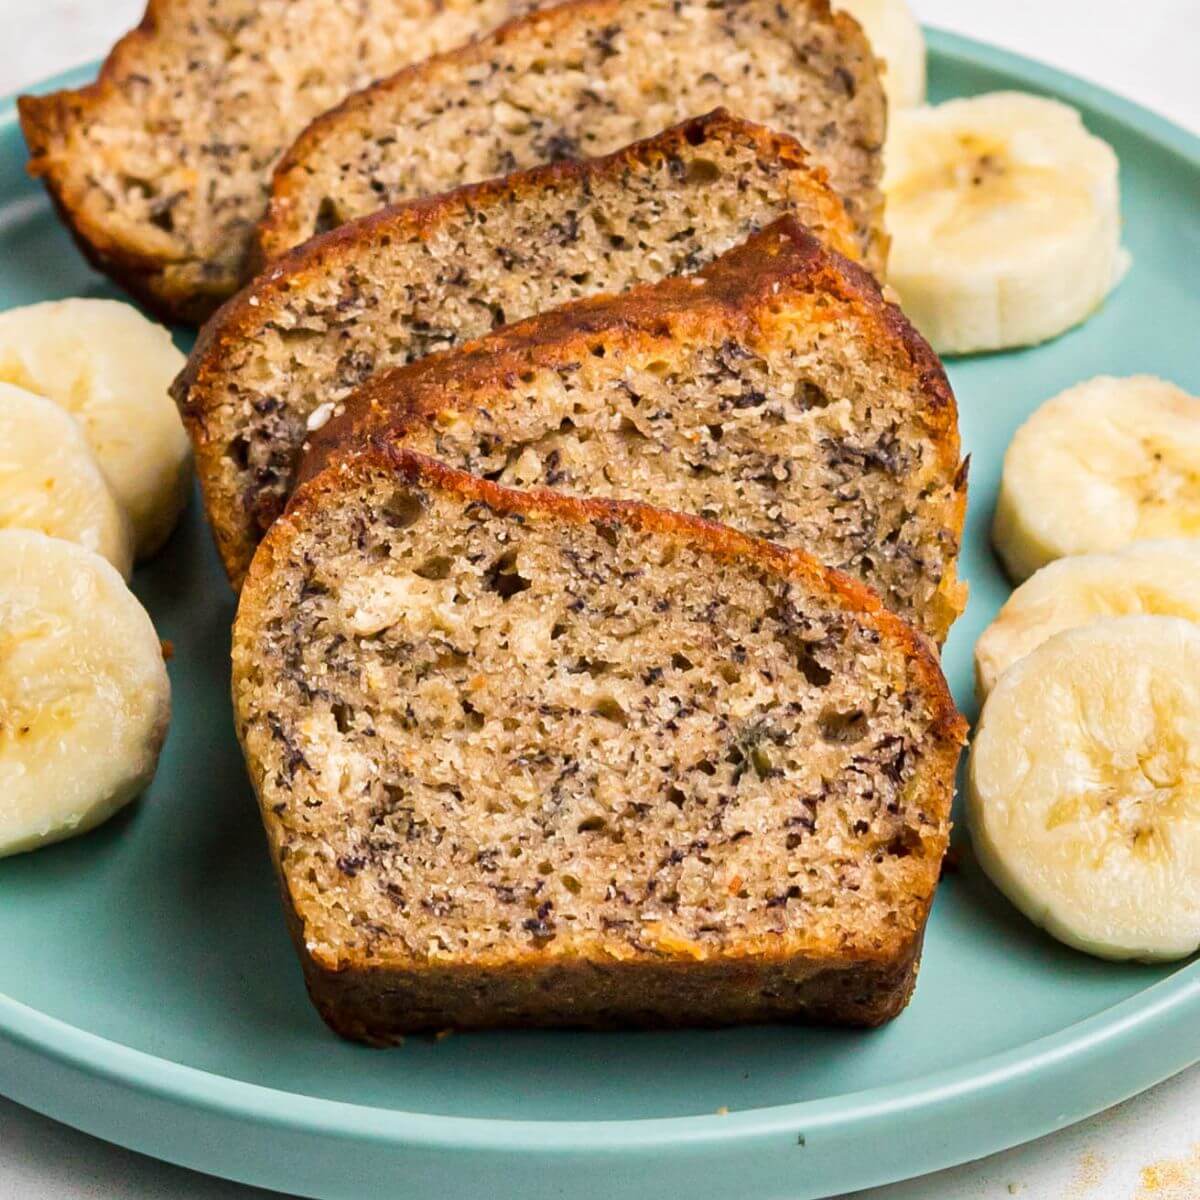 Golden moist bread sliced on a light green plate with slices of bananas.